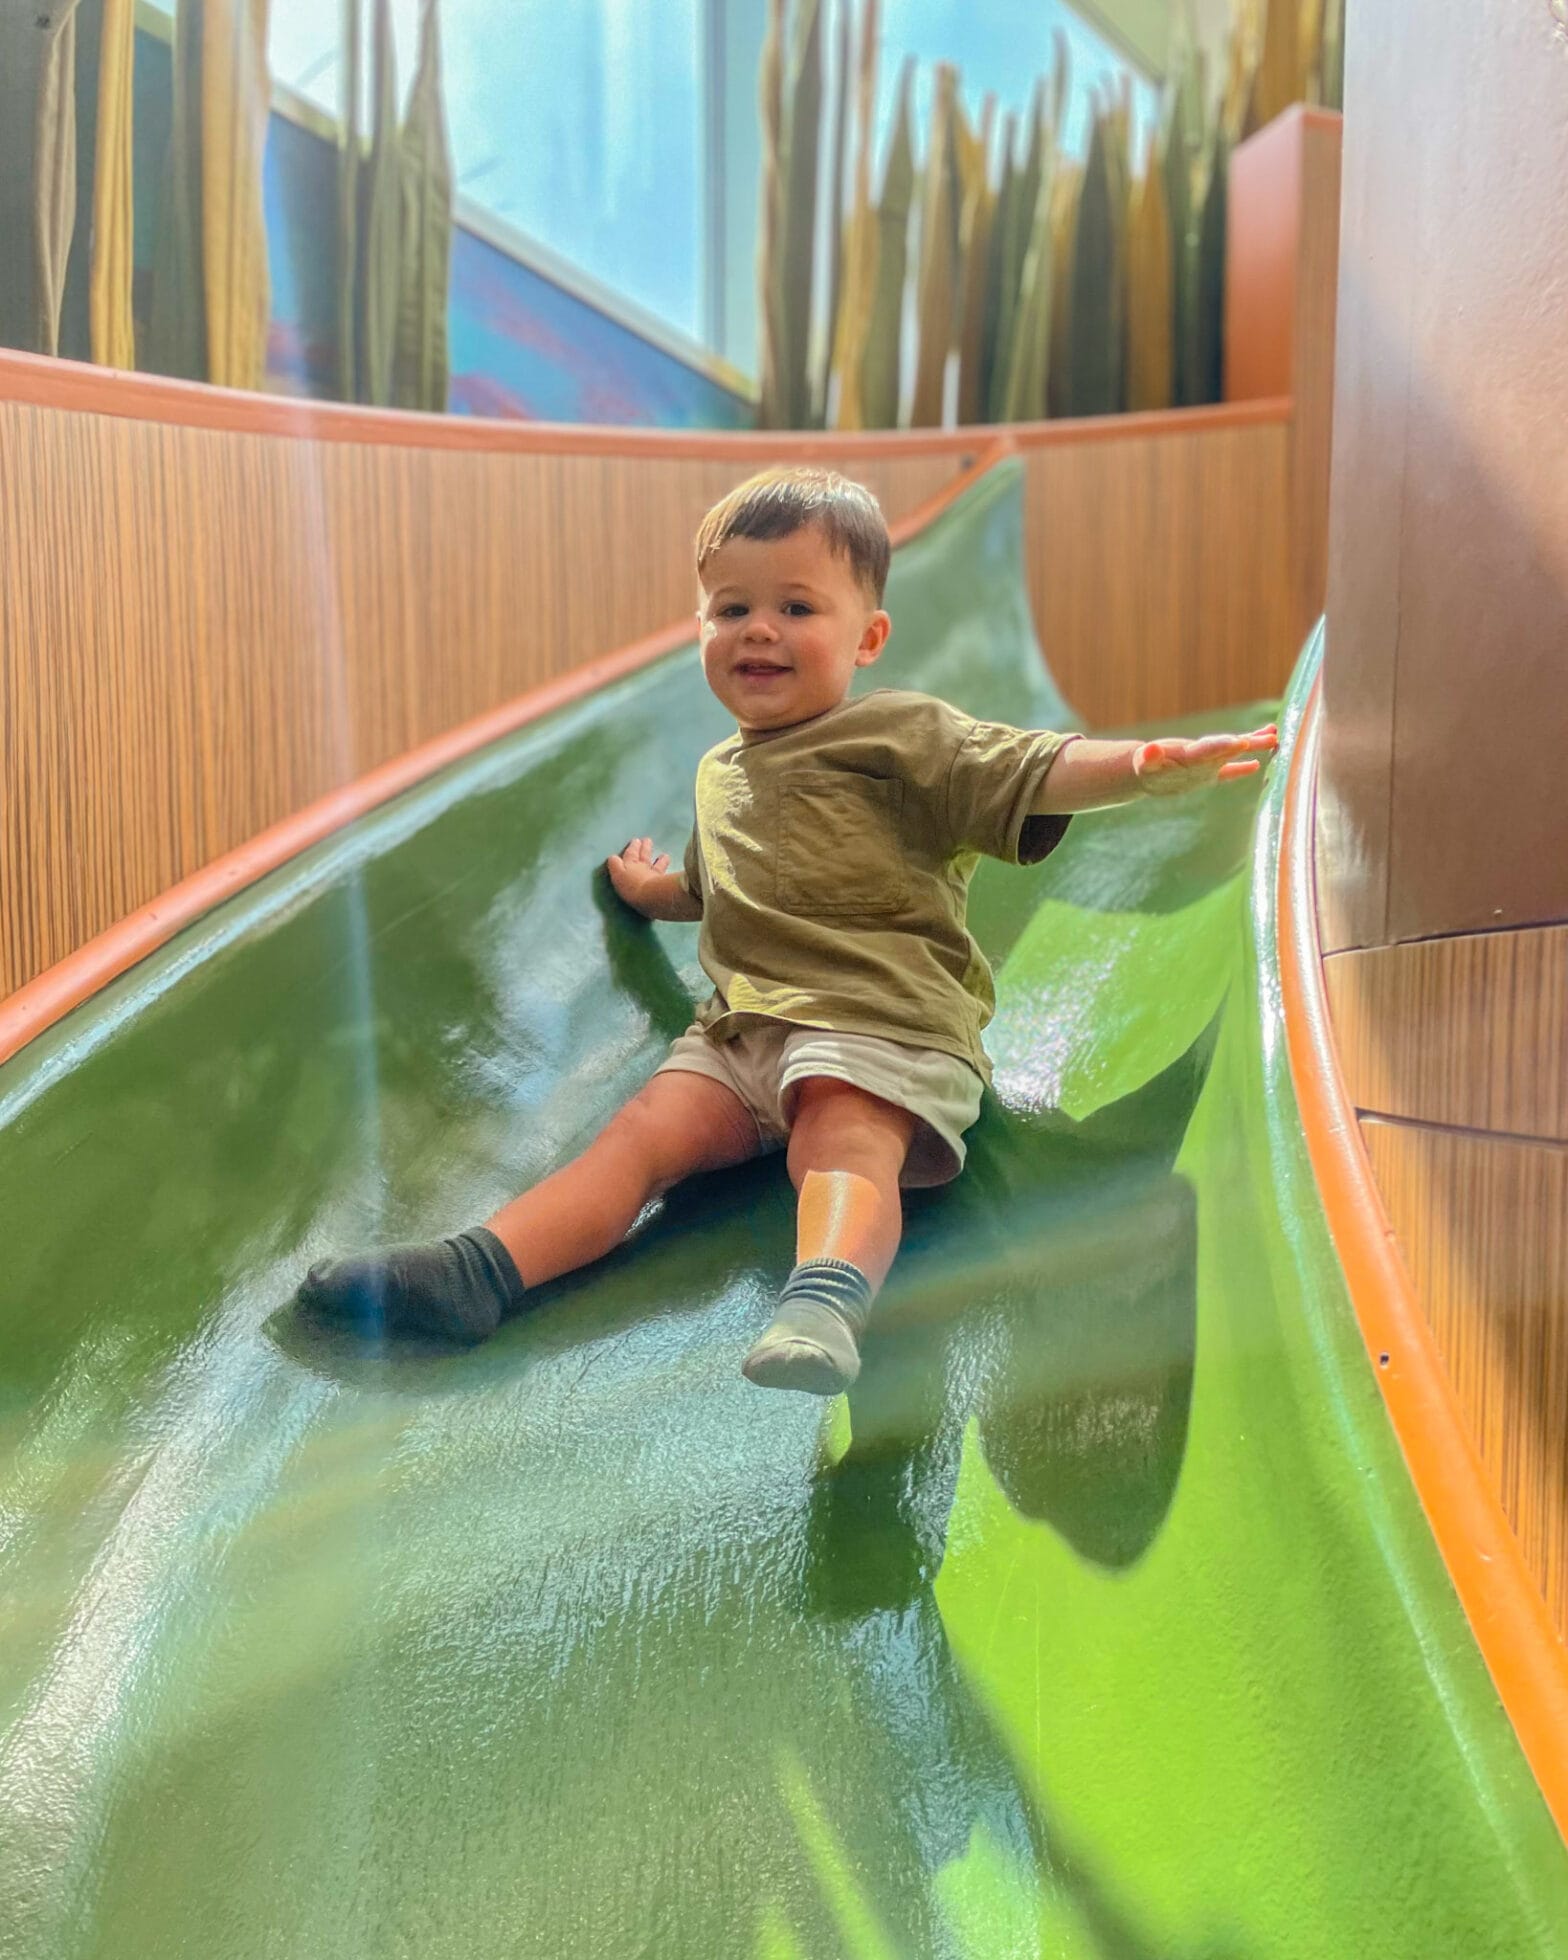 A little boy sliding down the green slide in the Crawbaby play area